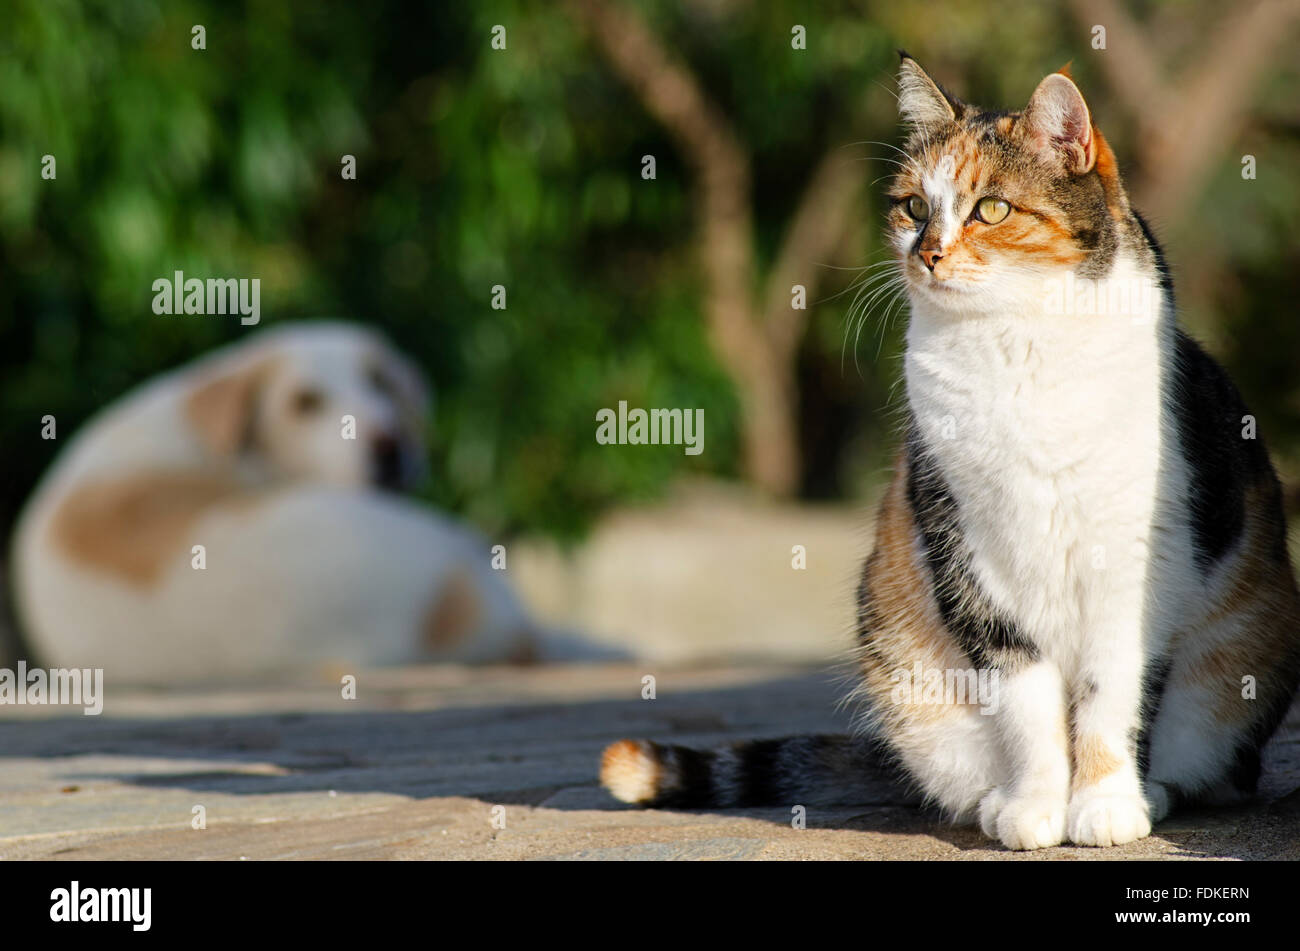 Cat and dog sitting outdoors (with focus on cat) Stock Photo